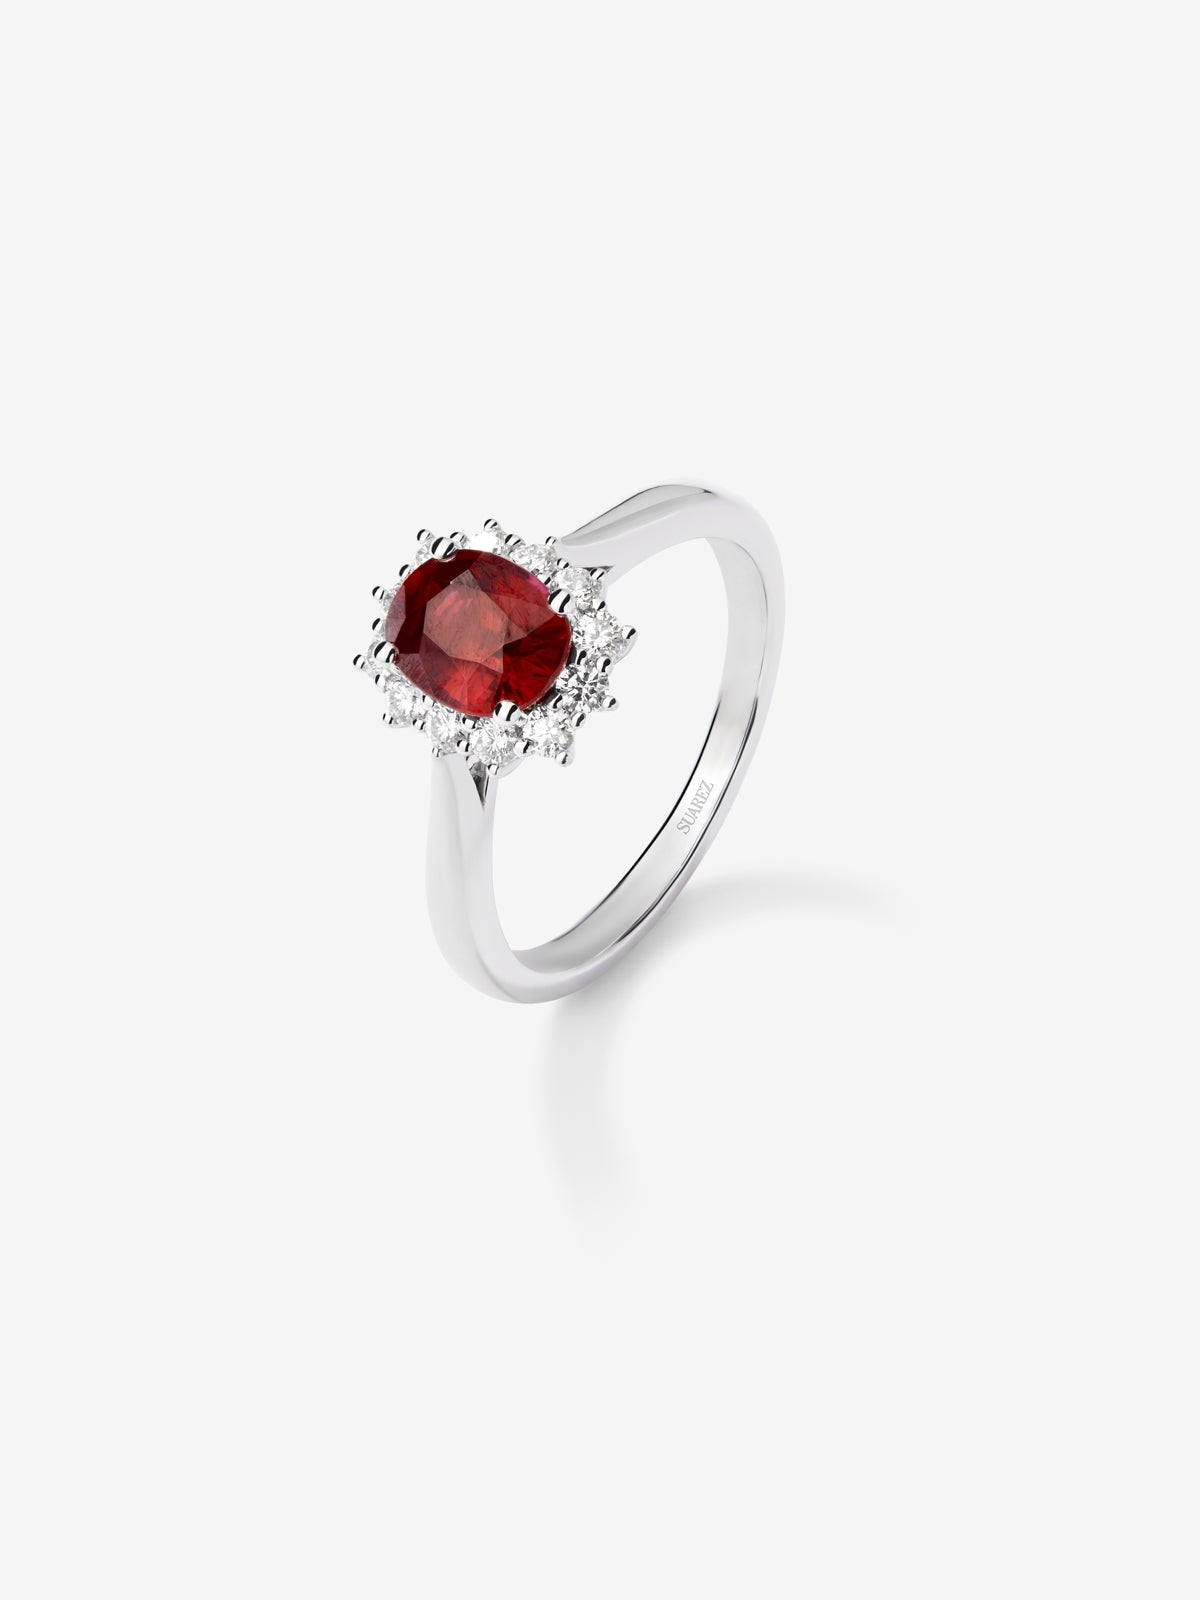 18K white gold ring with oval-cut red ruby ​​of 0.68 cts and 12 brilliant-cut diamonds with a total of 0.18 cts